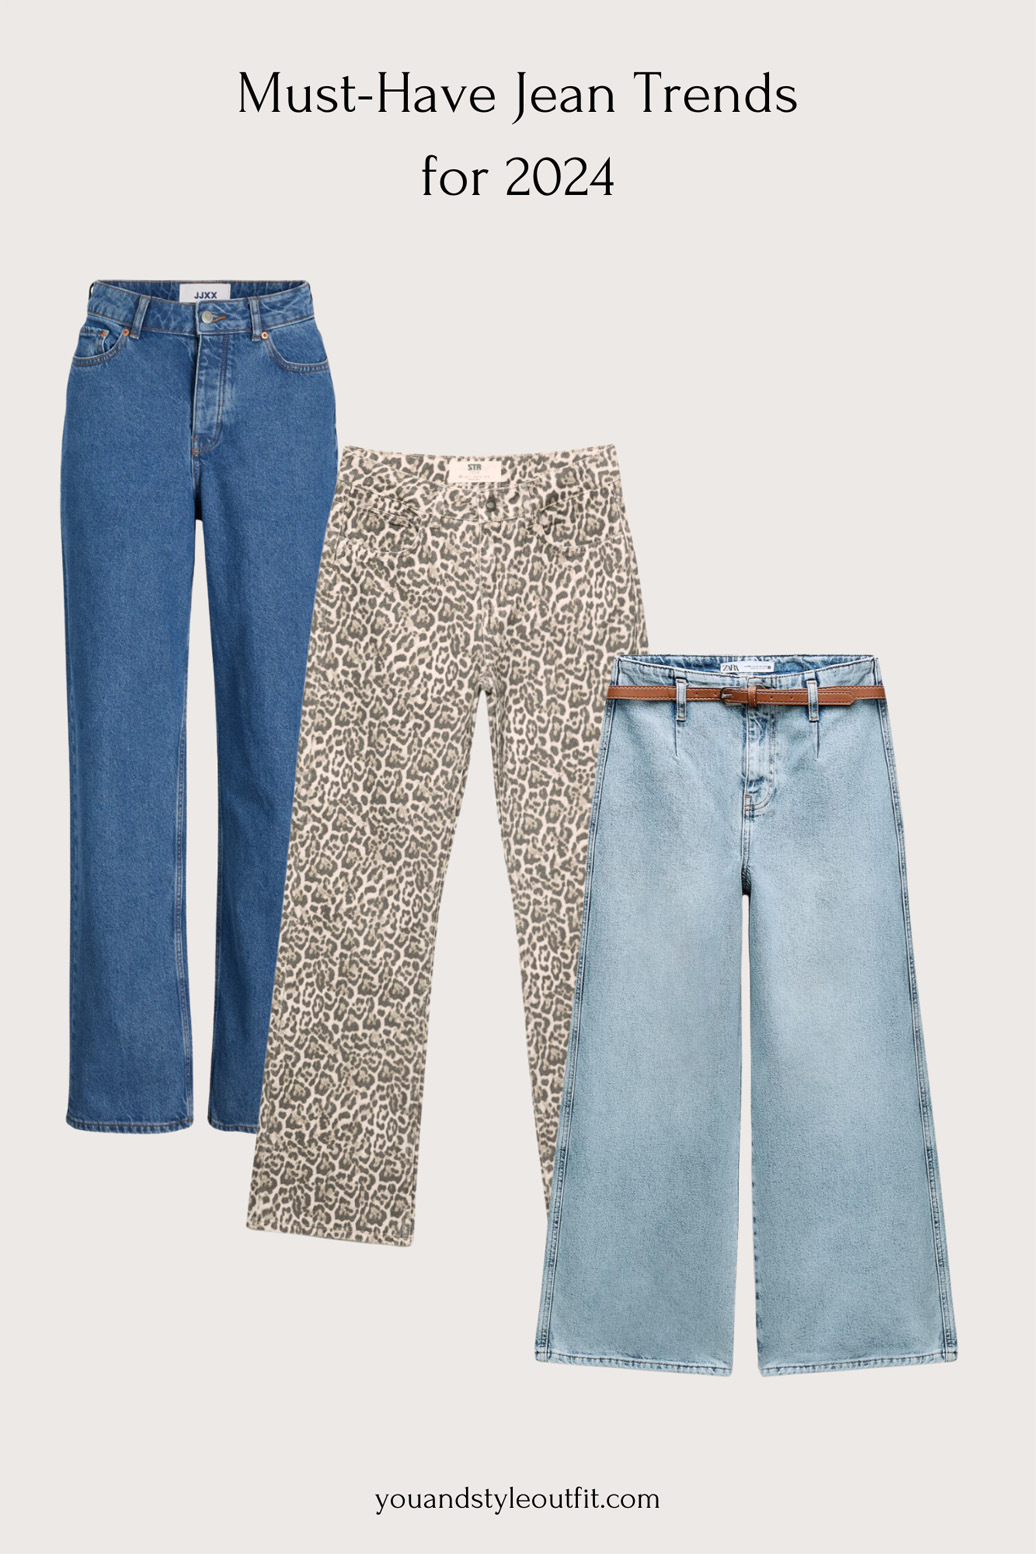 Denim Dreams: Must-Have Jean Trends for 2024